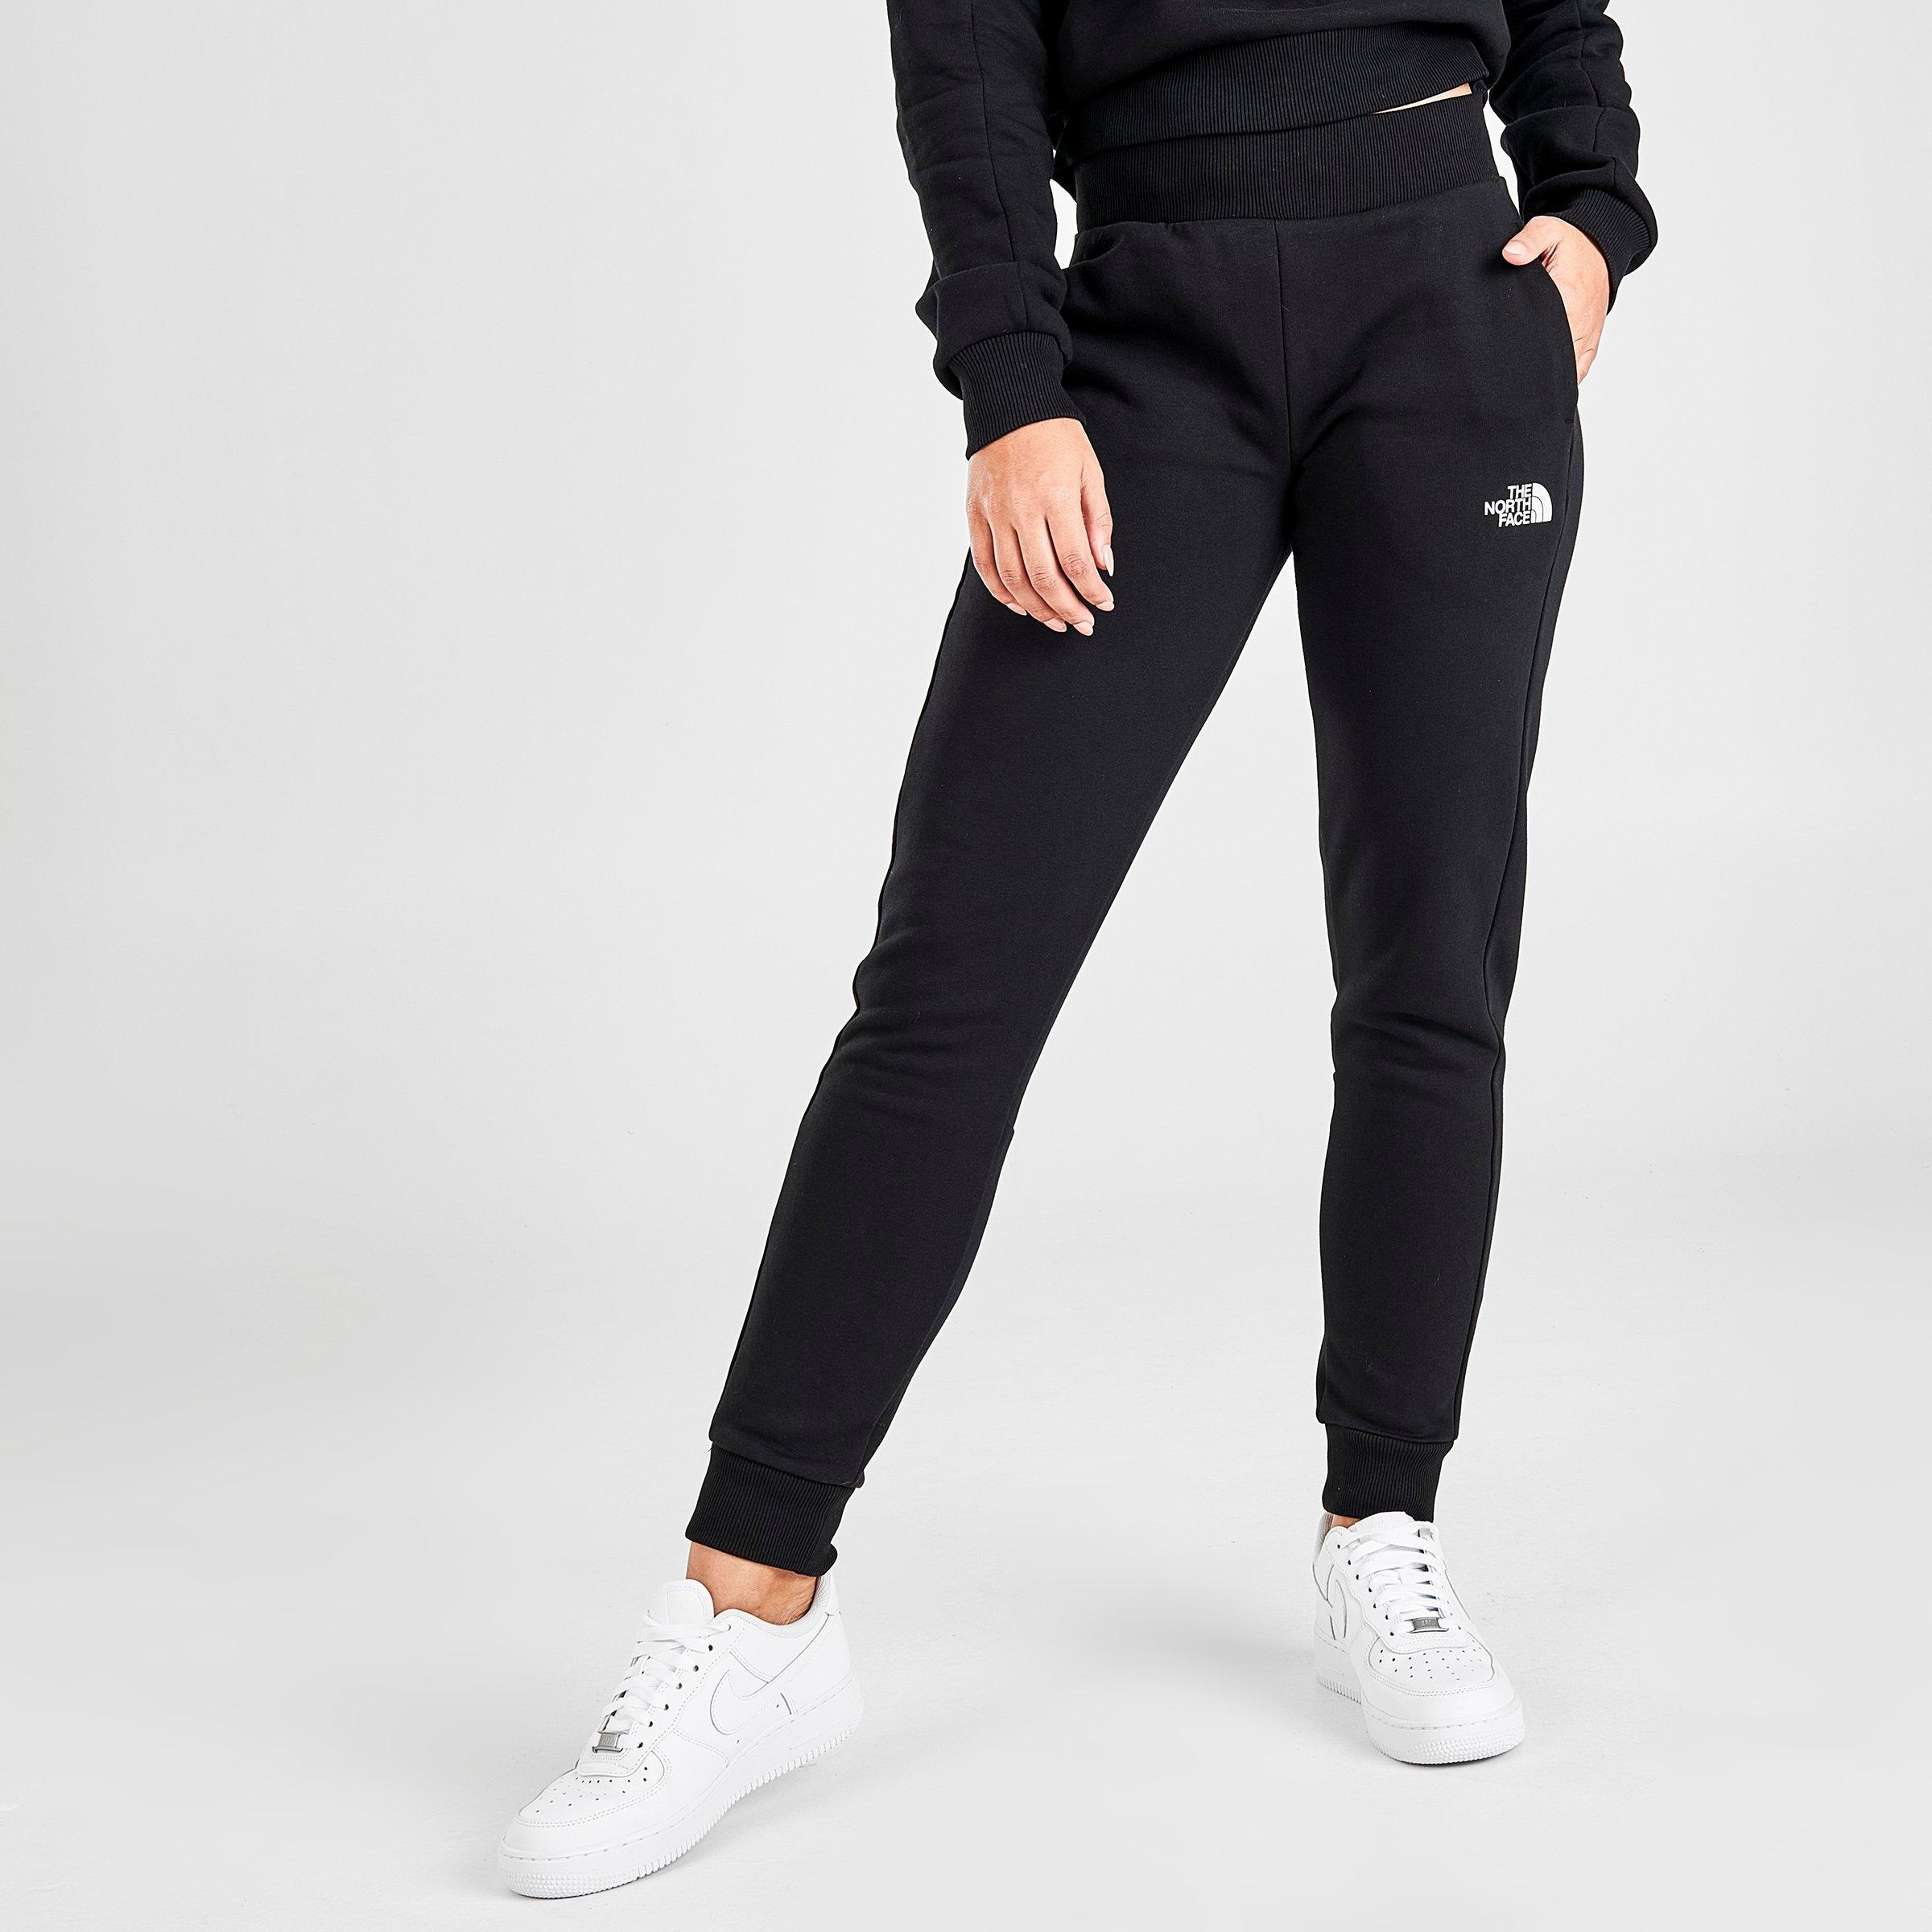 north face sweatpants womens